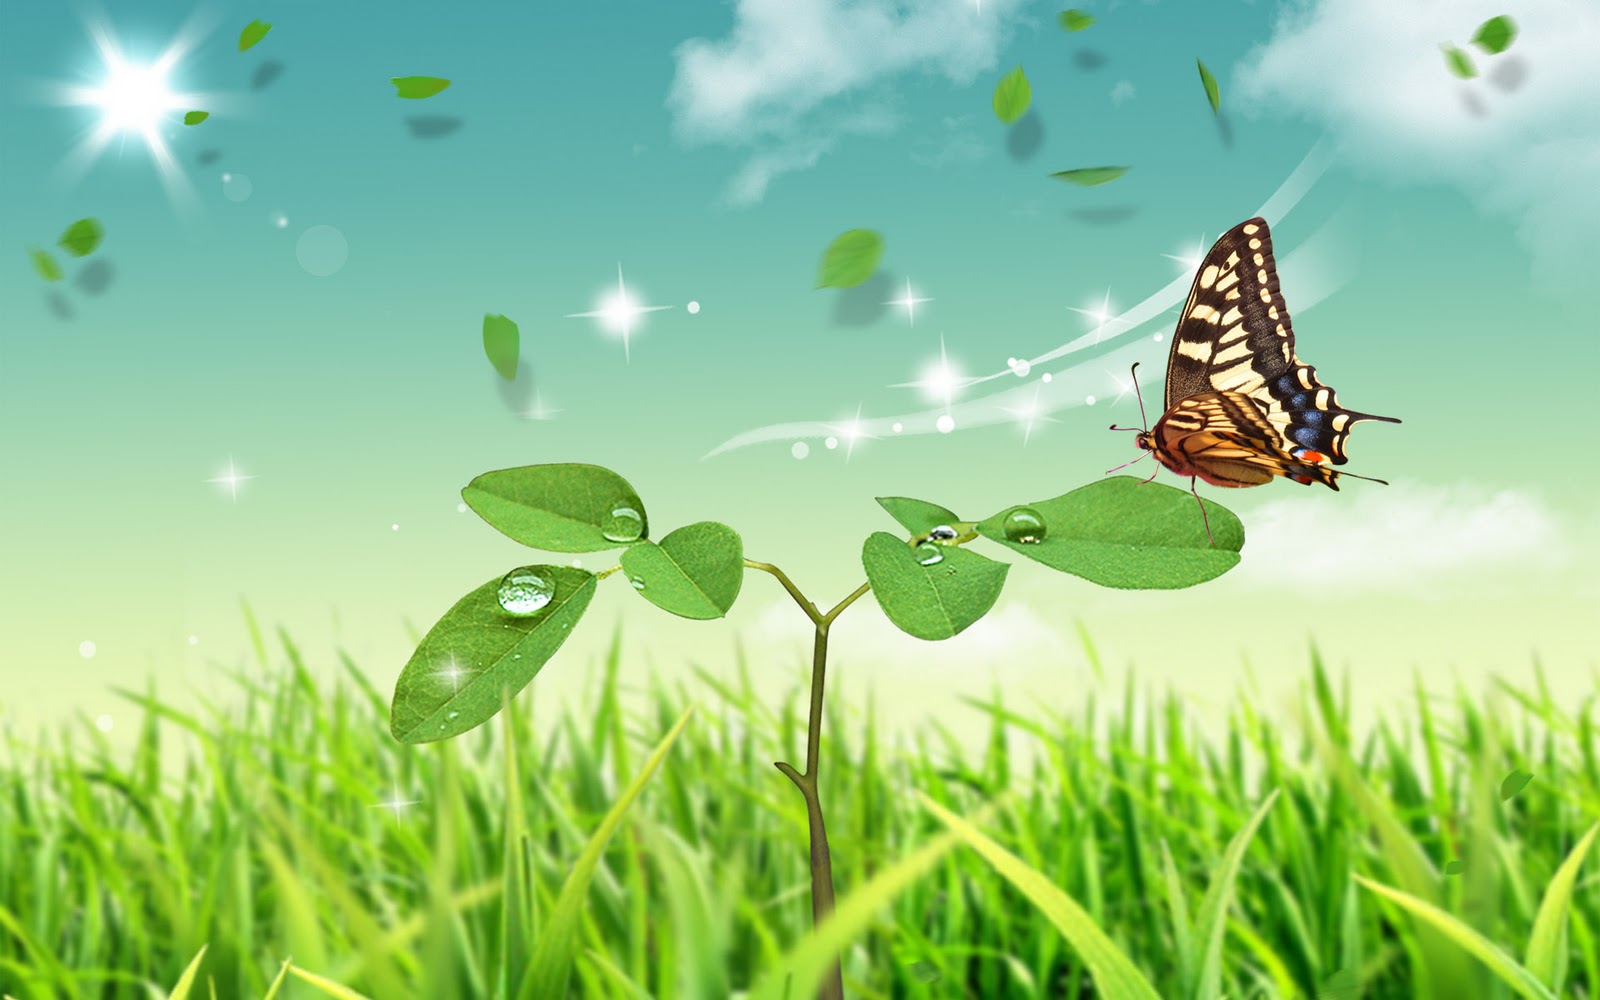 roj wallpaper,butterfly,green,nature,natural landscape,insect